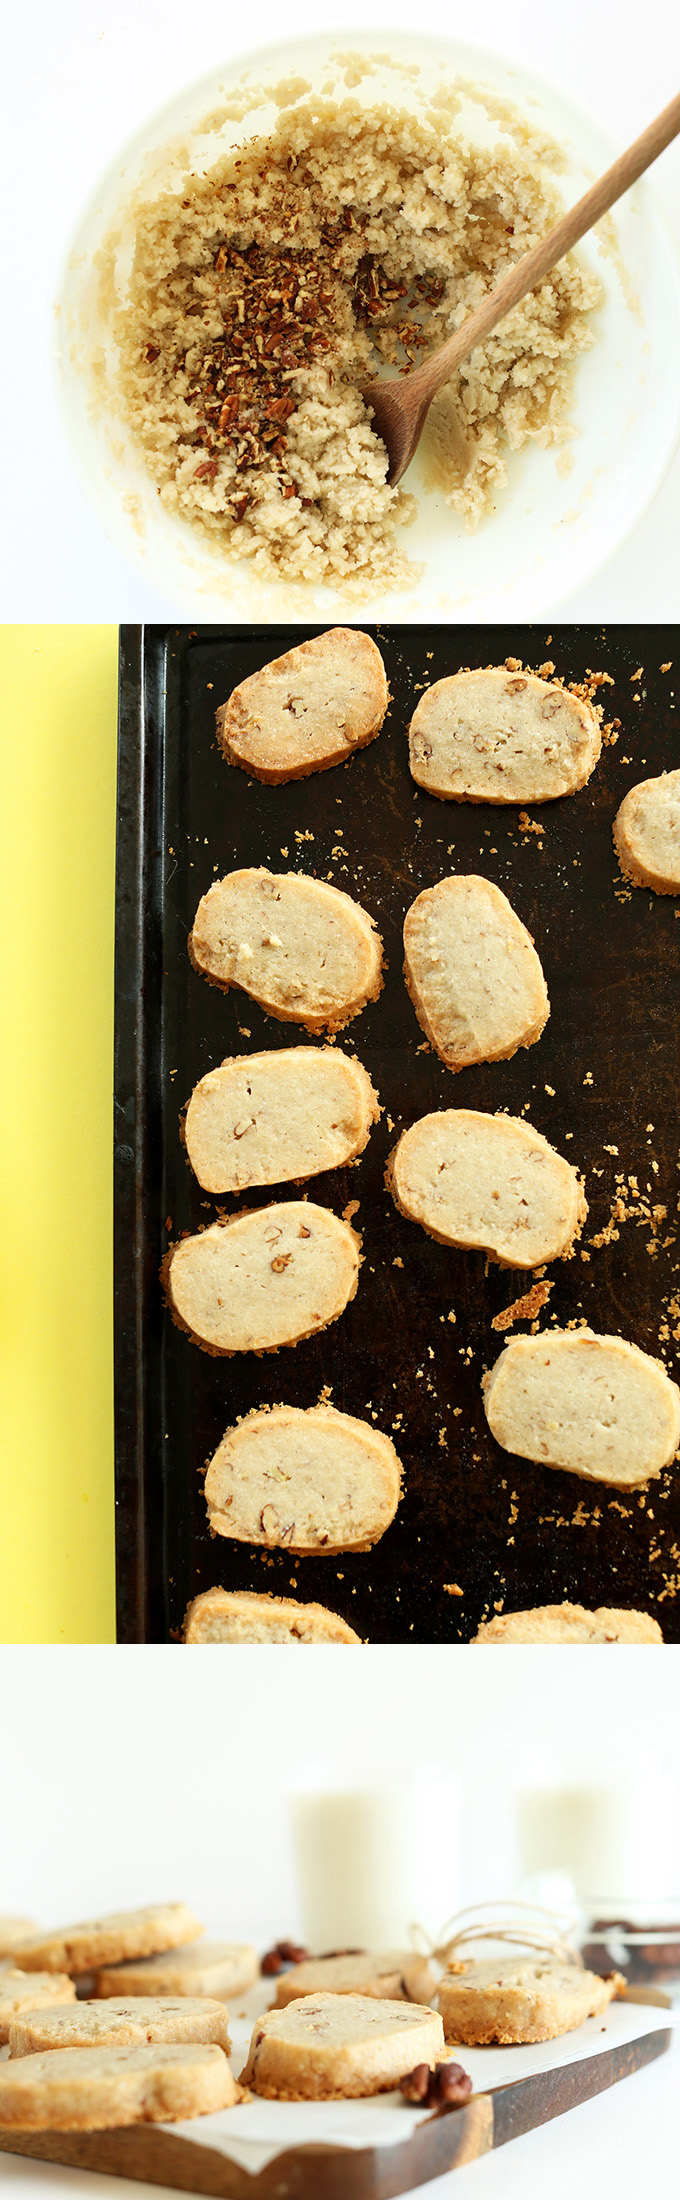 Mixing bowl of shortbread ingredients and baking sheet and cutting board of freshly baked shortbread cookies